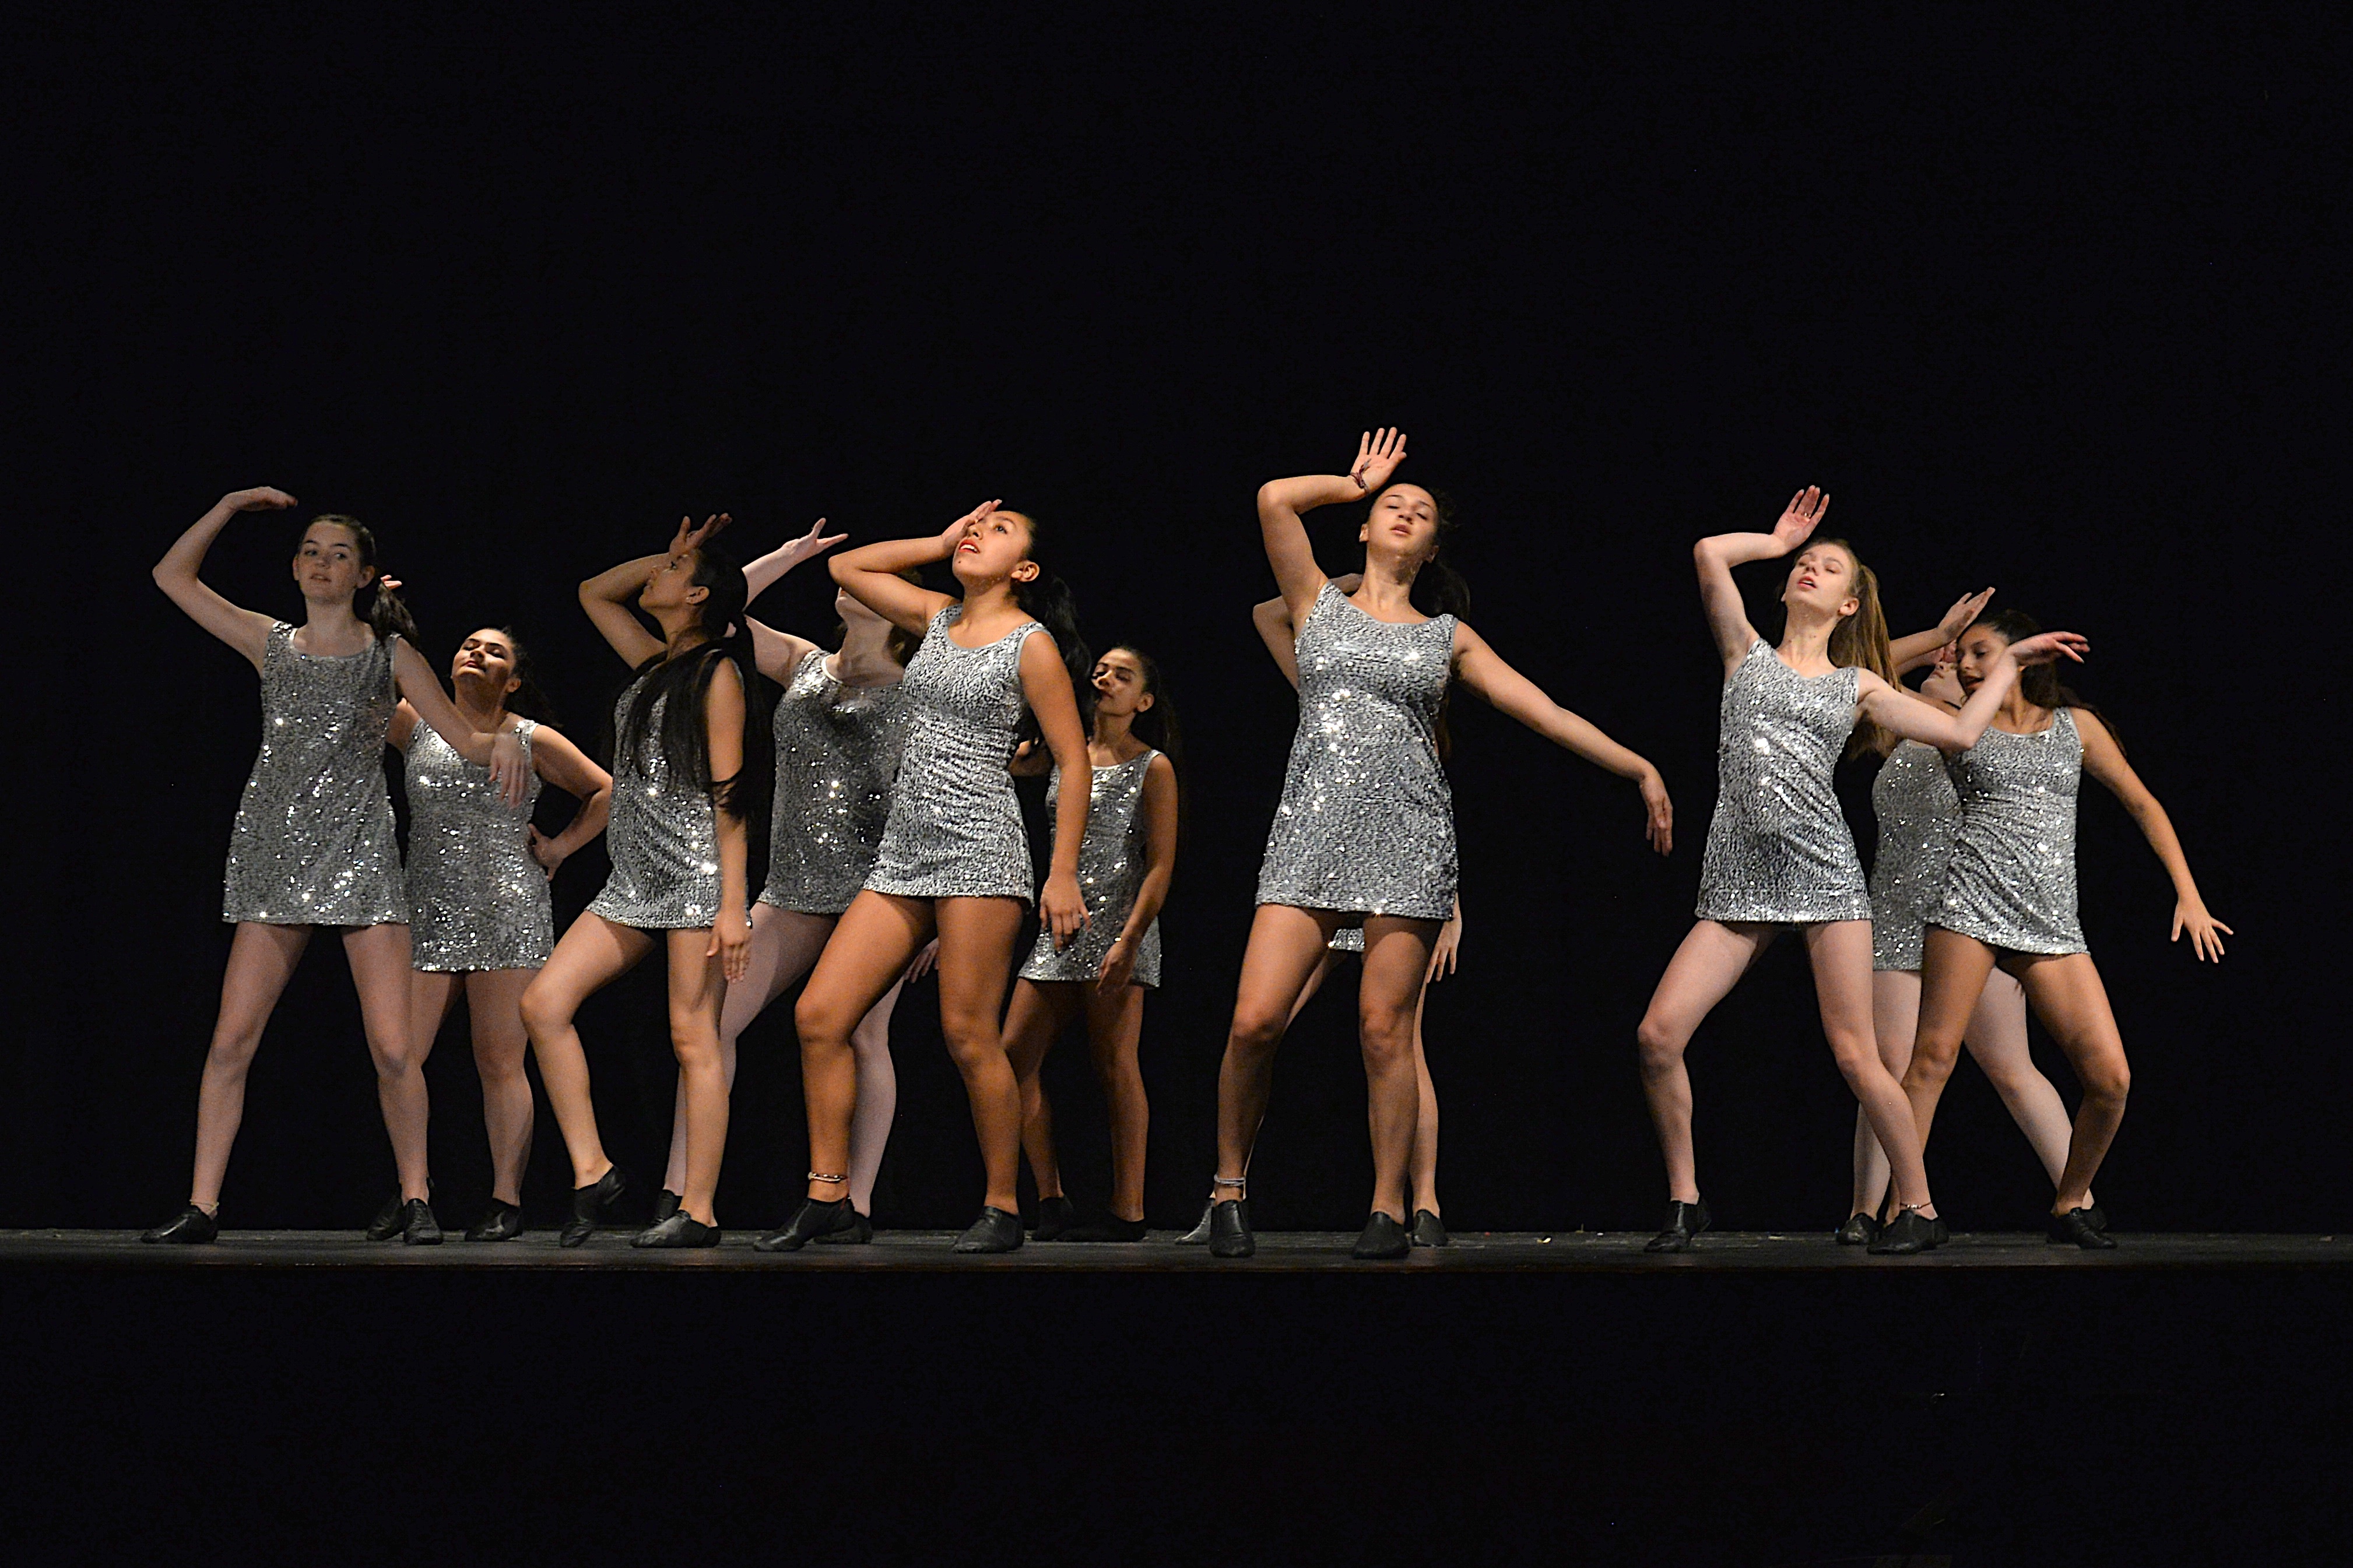 East Hampton High School students were the performers in the Bonac Broadway Bistro event on Friday at the high school. It raised money for the district's arts programs.